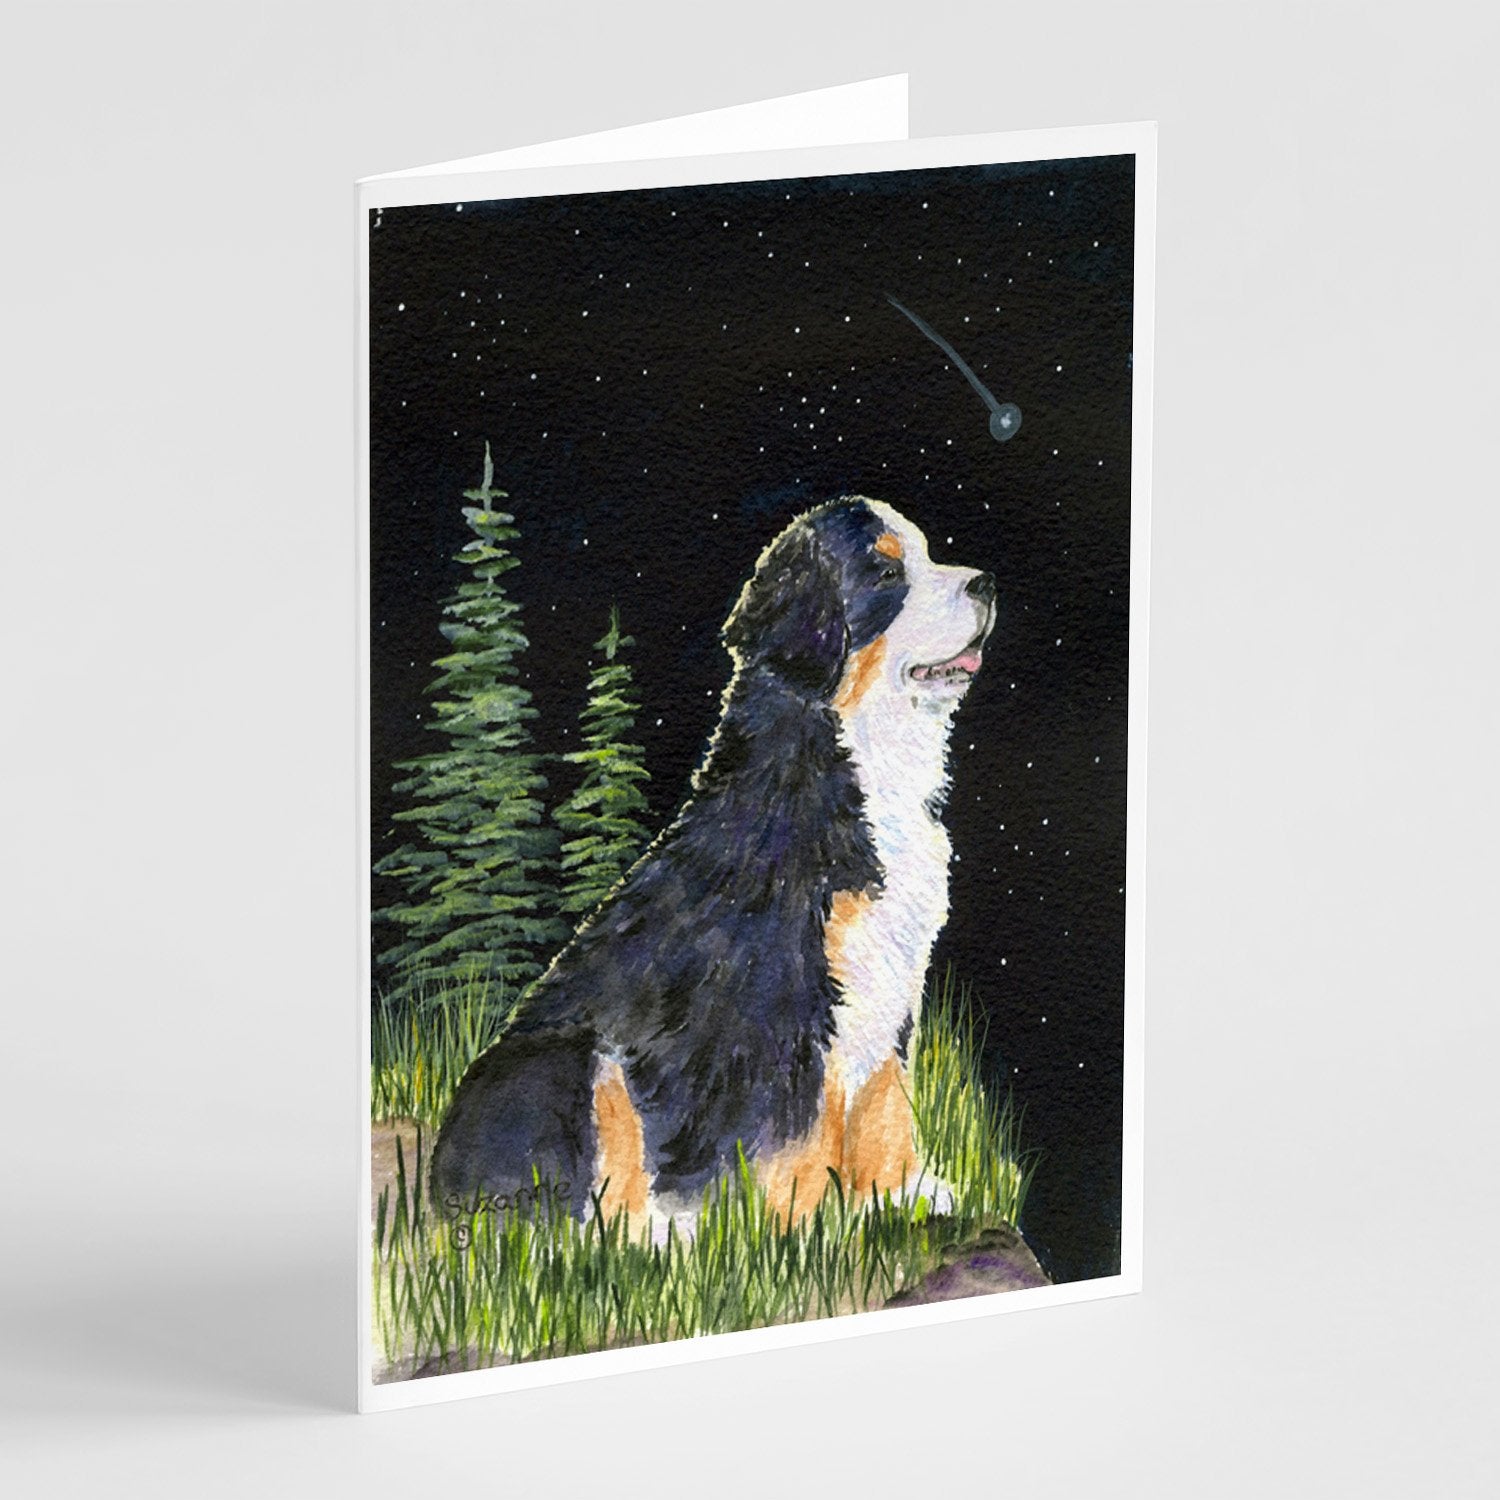 Buy this Starry Night Bernese Mountain Dog Greeting Cards and Envelopes Pack of 8